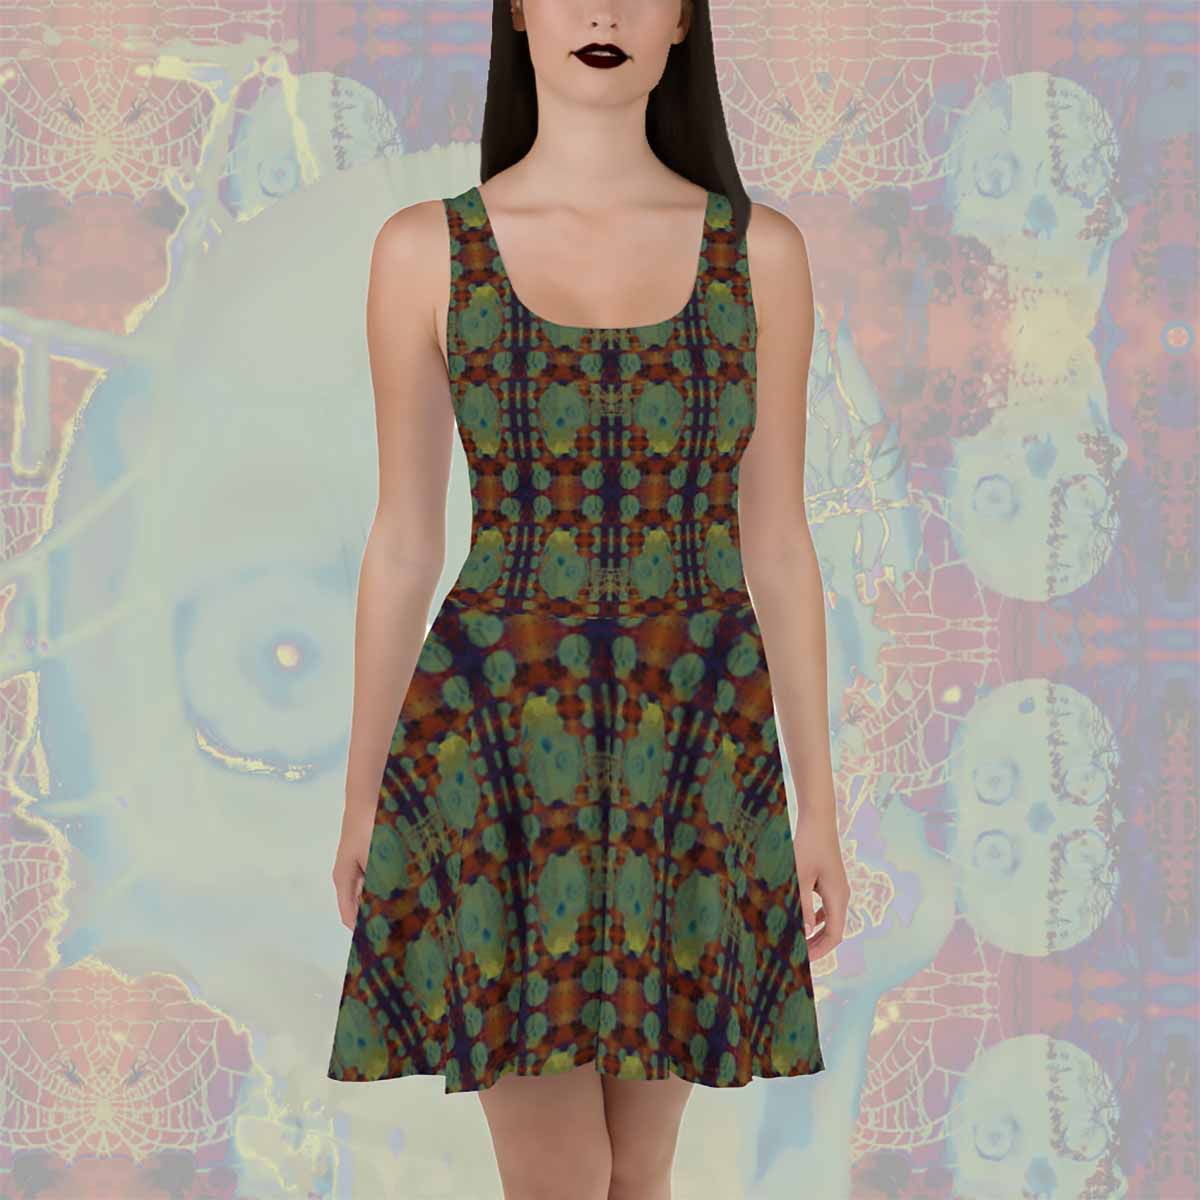 Glowing Skulls Skater Dress; Melasdesign; Witchy Gothic Clothes Collection; goth; alternative; pagan; fashion; witchy; dress; Summer; mini; short